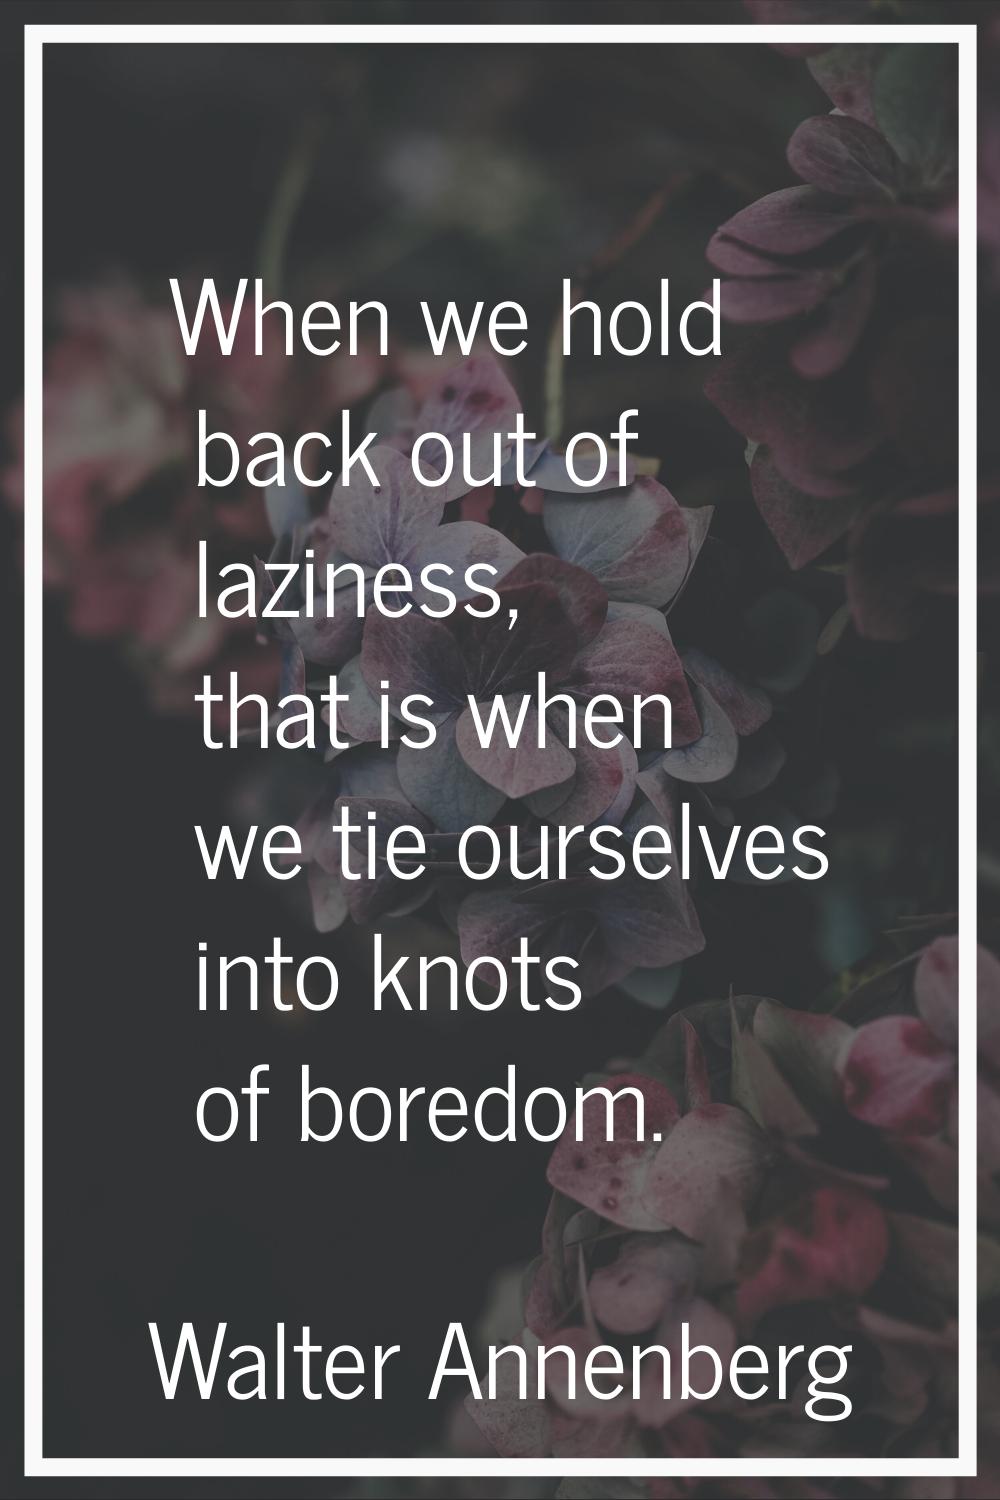 When we hold back out of laziness, that is when we tie ourselves into knots of boredom.